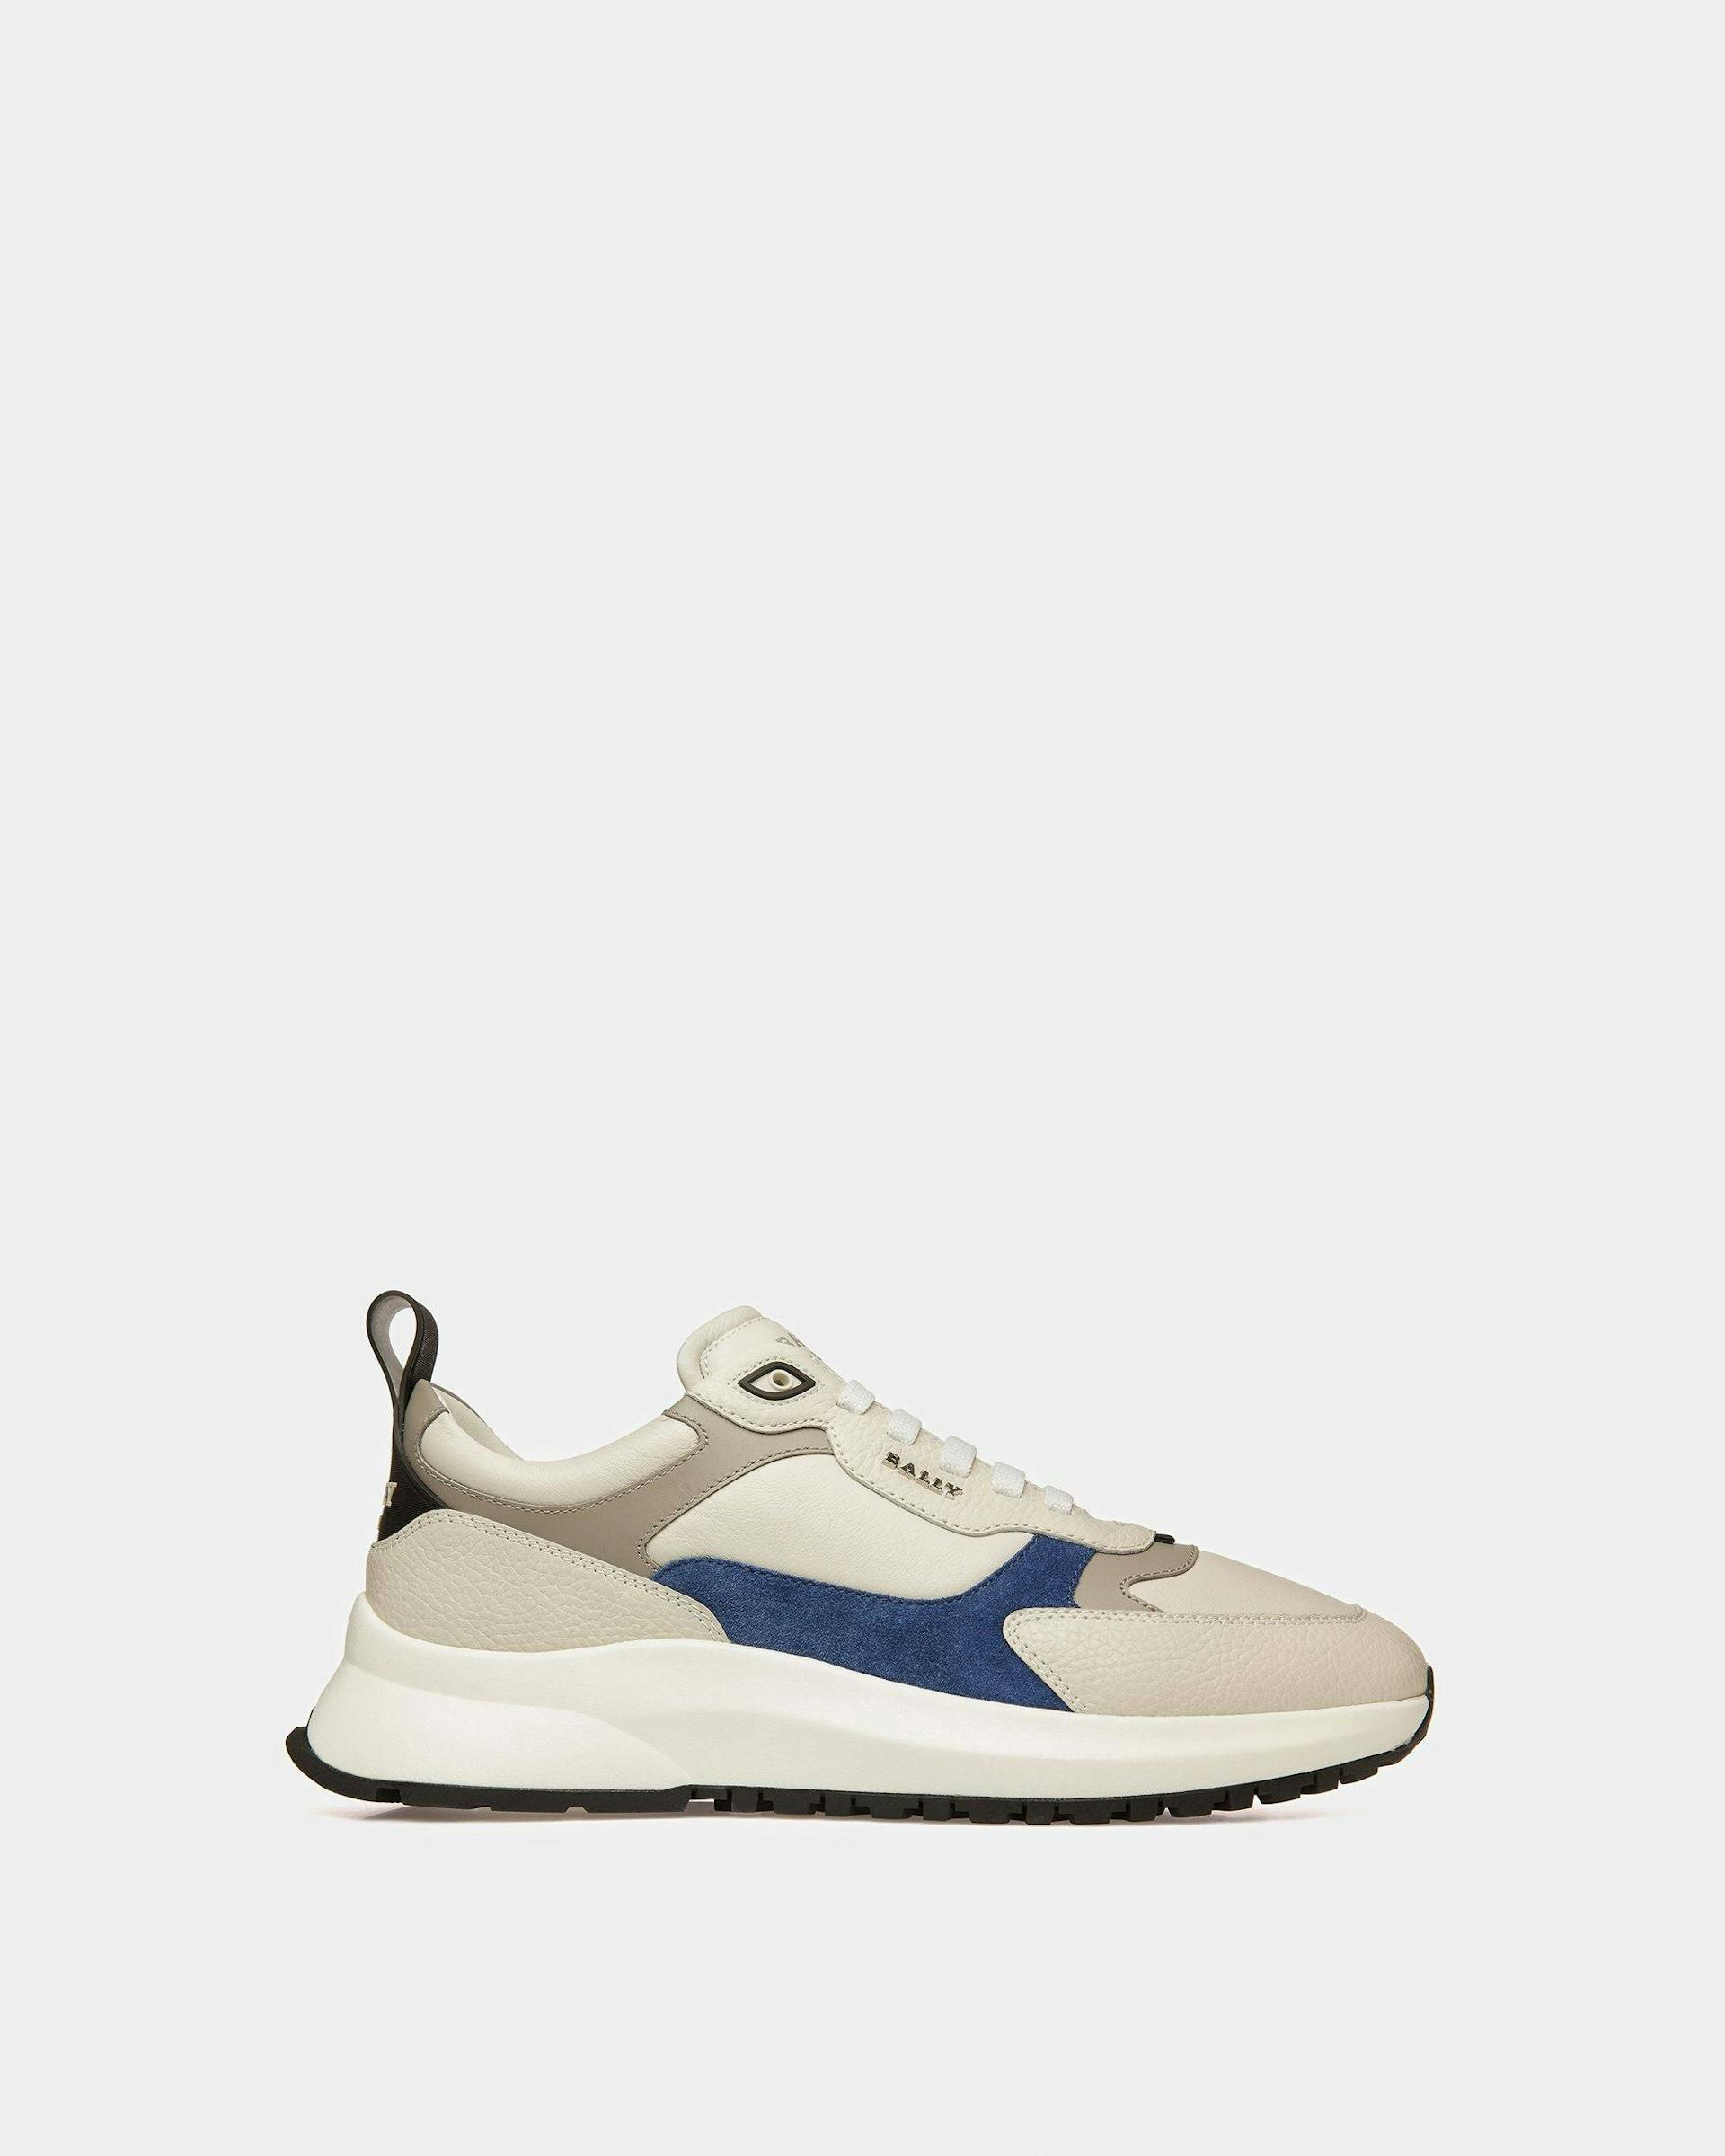 Dave Leather And Fabric Sneakers In Dusty White And Blue Neon - Men's - Bally - 01